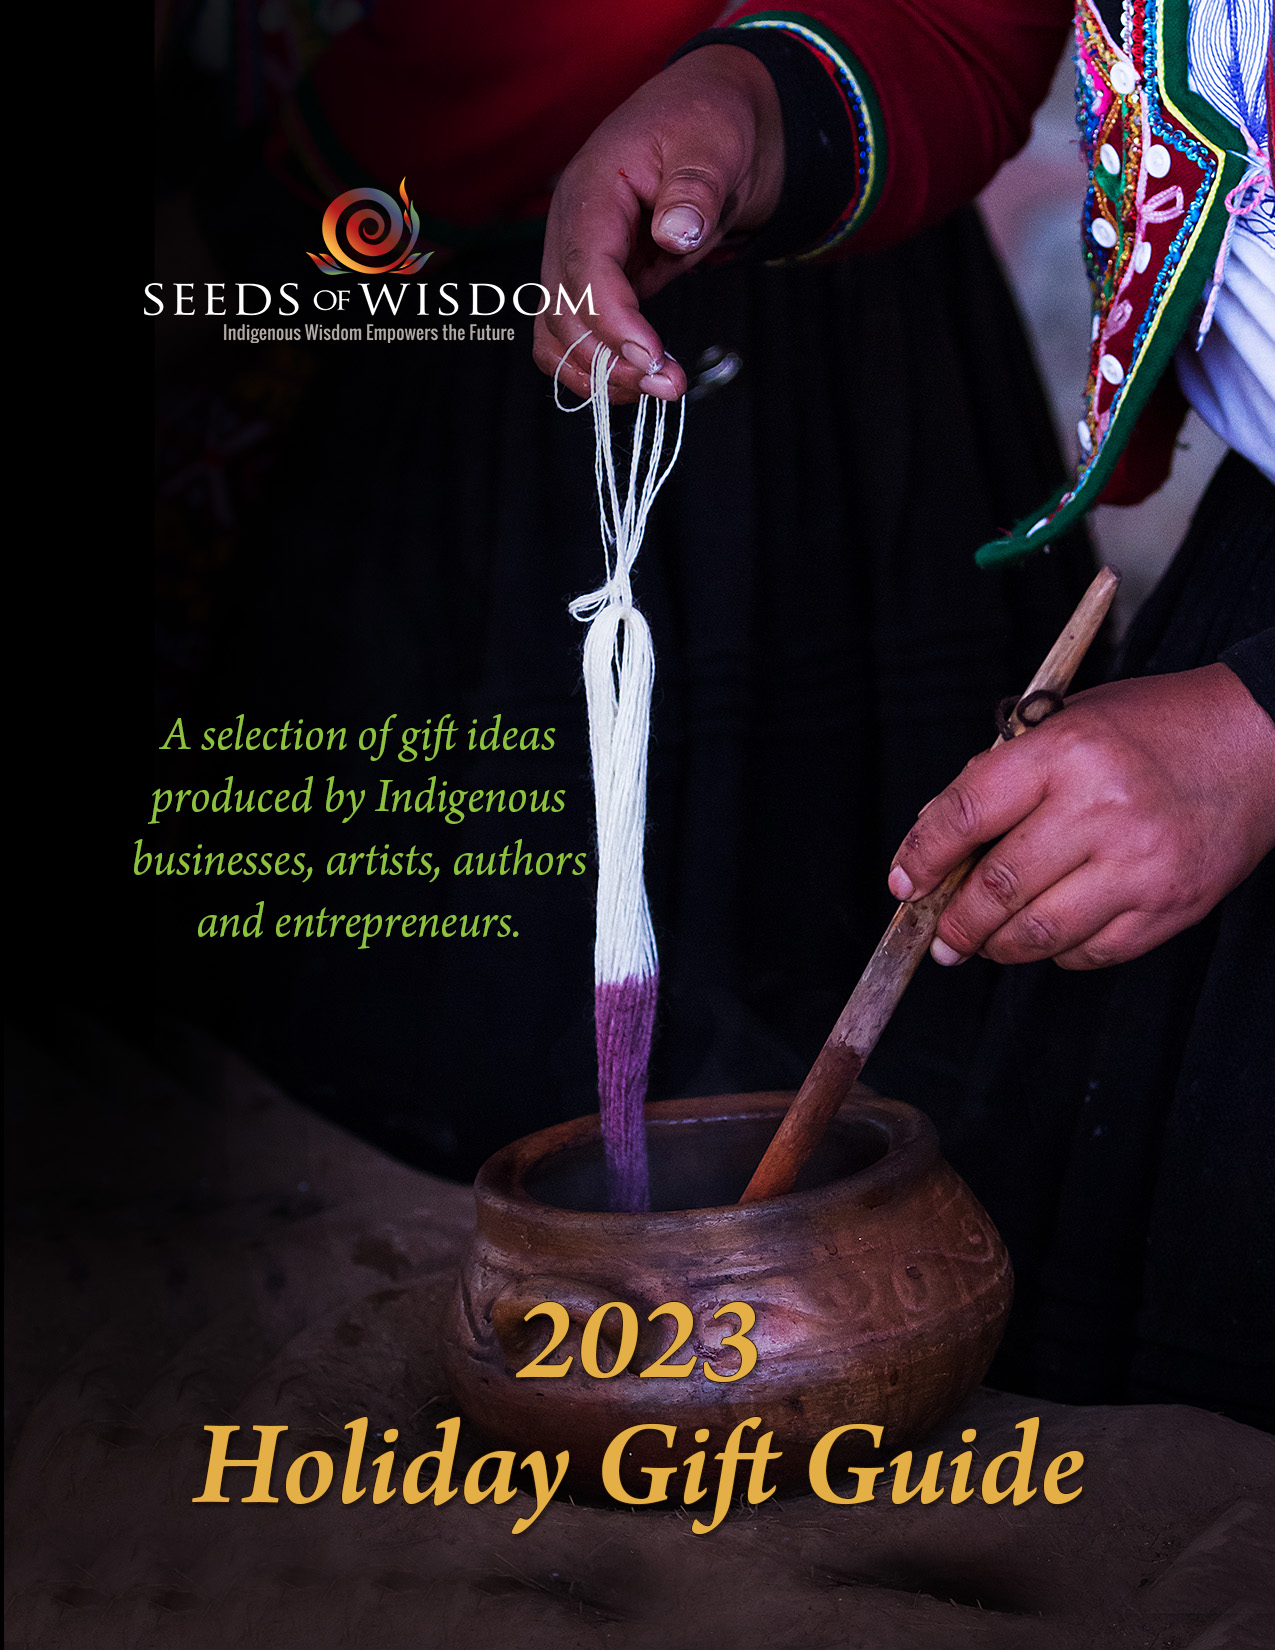 Seeds of Wisdom 2023 Holiday Gift Guide. Photo of a woman hand dying yard in a traditional way. 